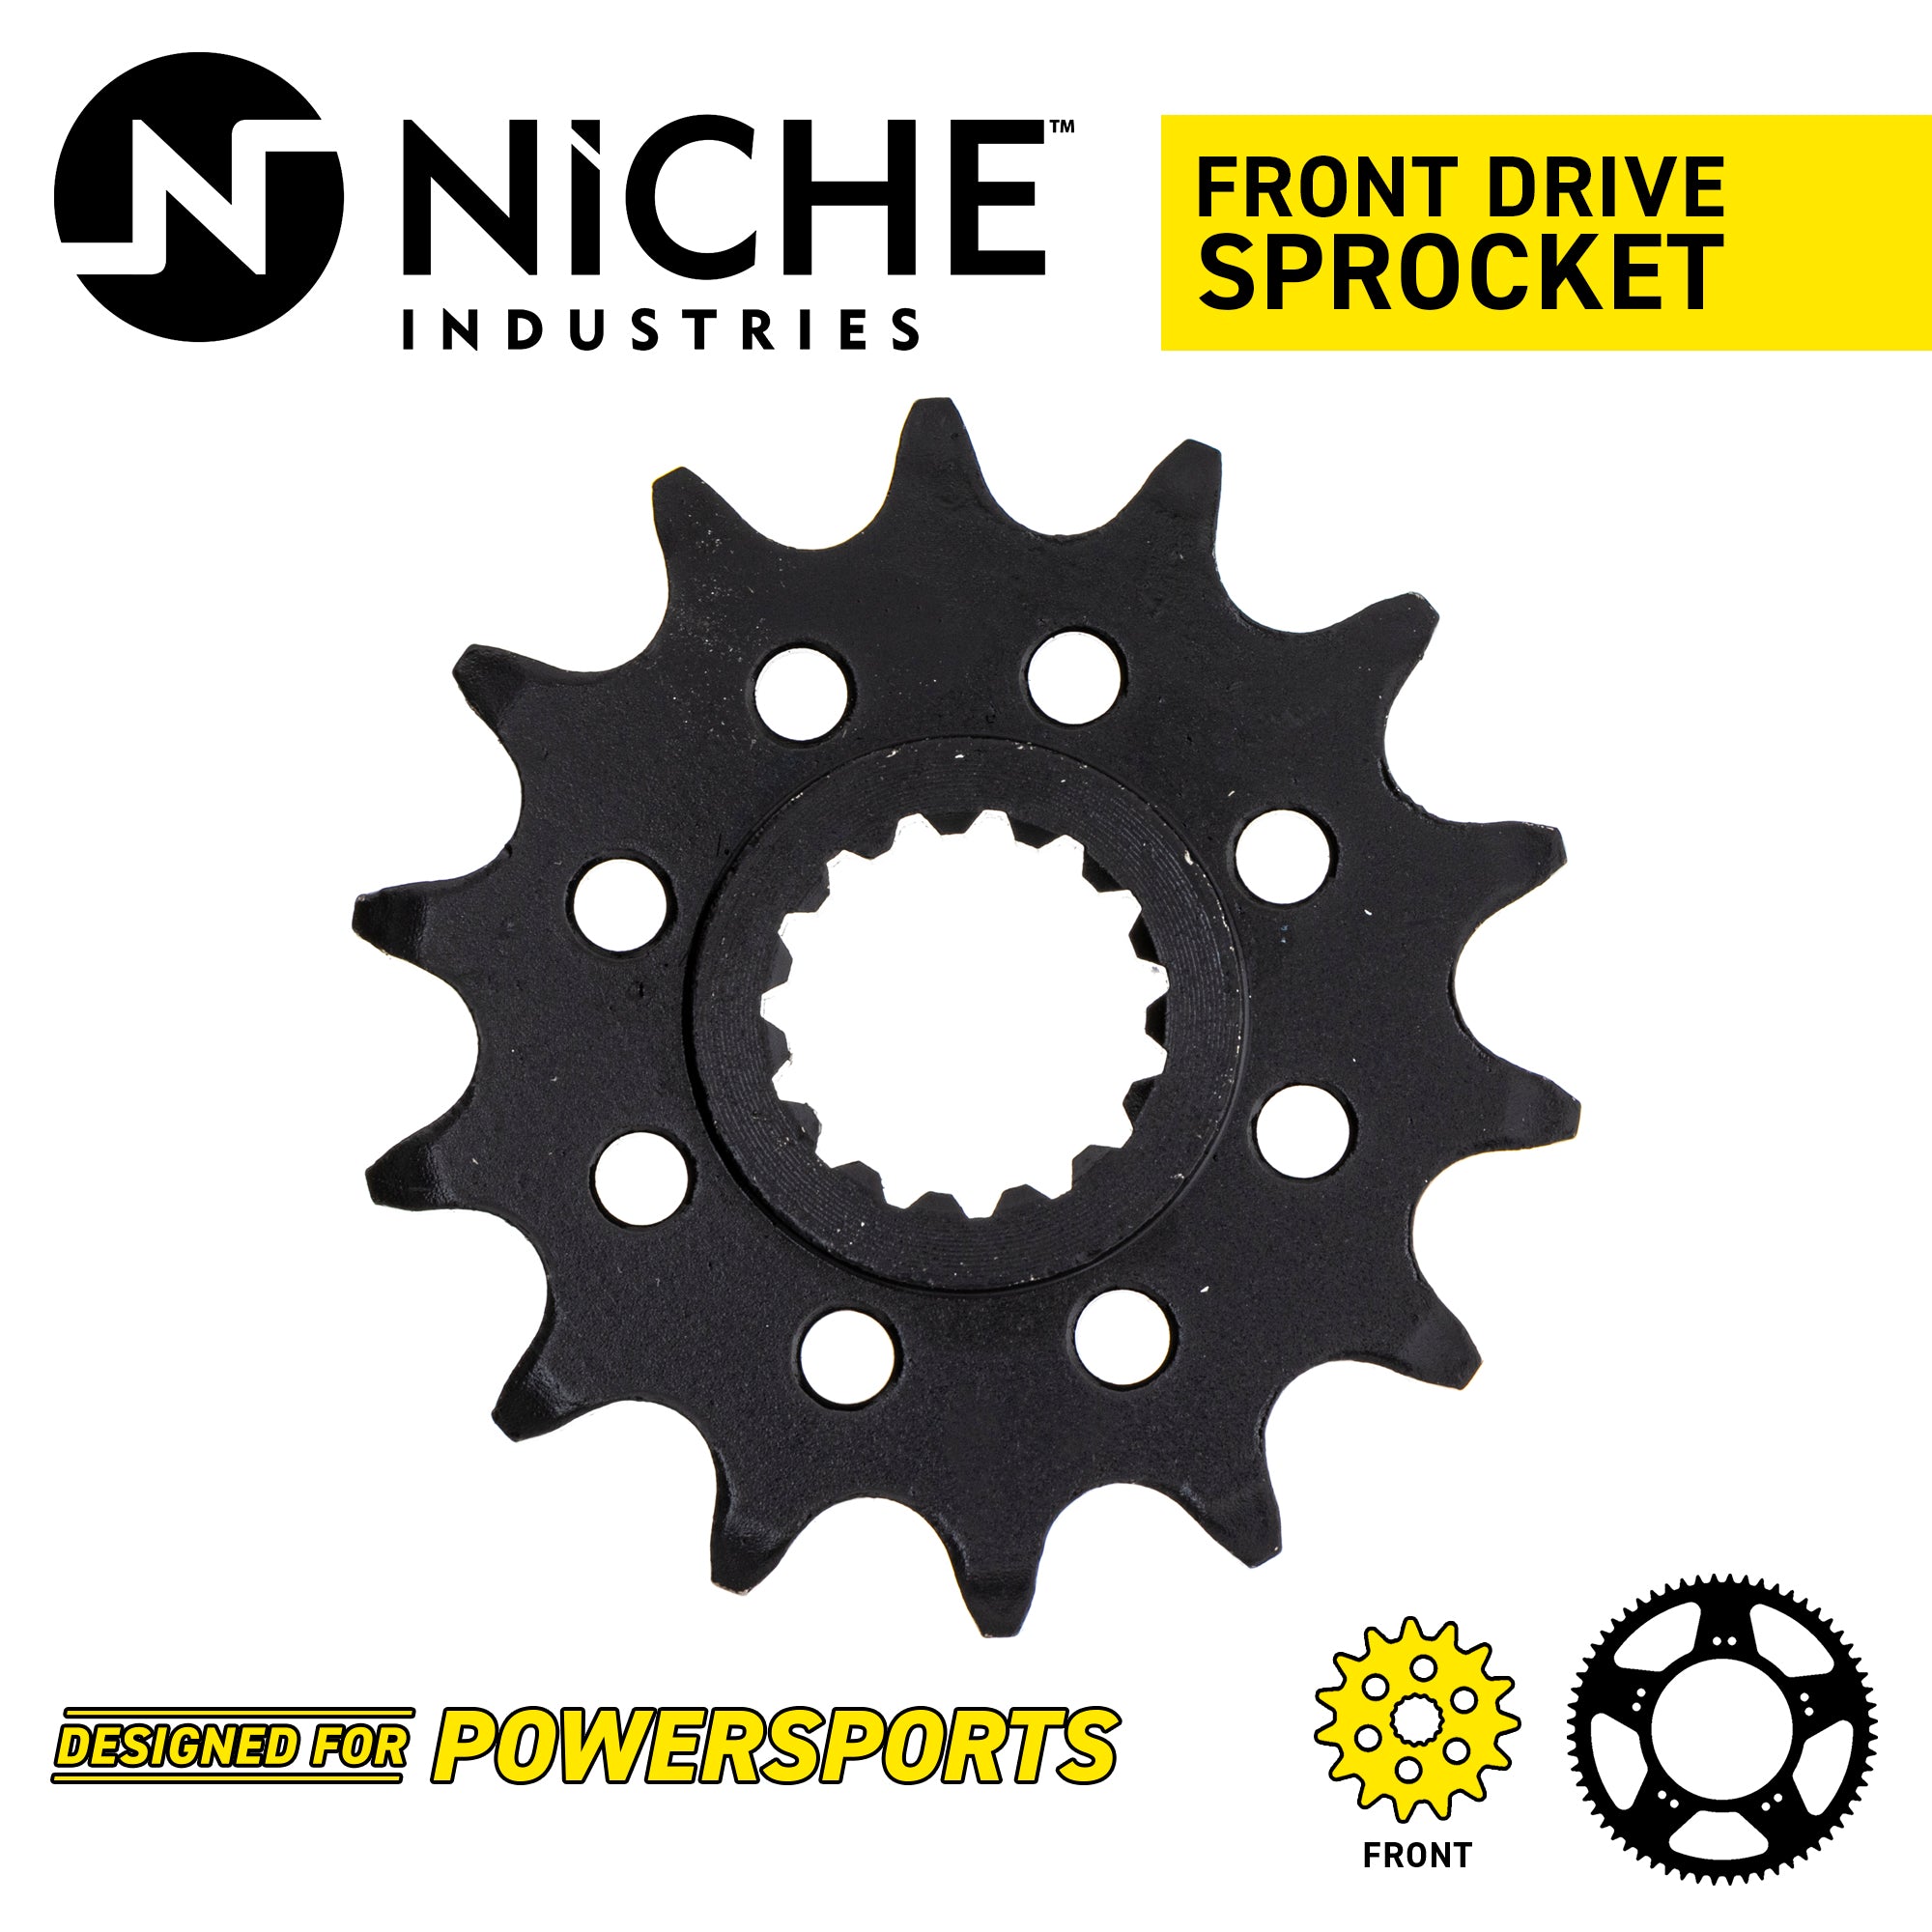 Drive Sprockets & Chain Kit For BETA MK1003604